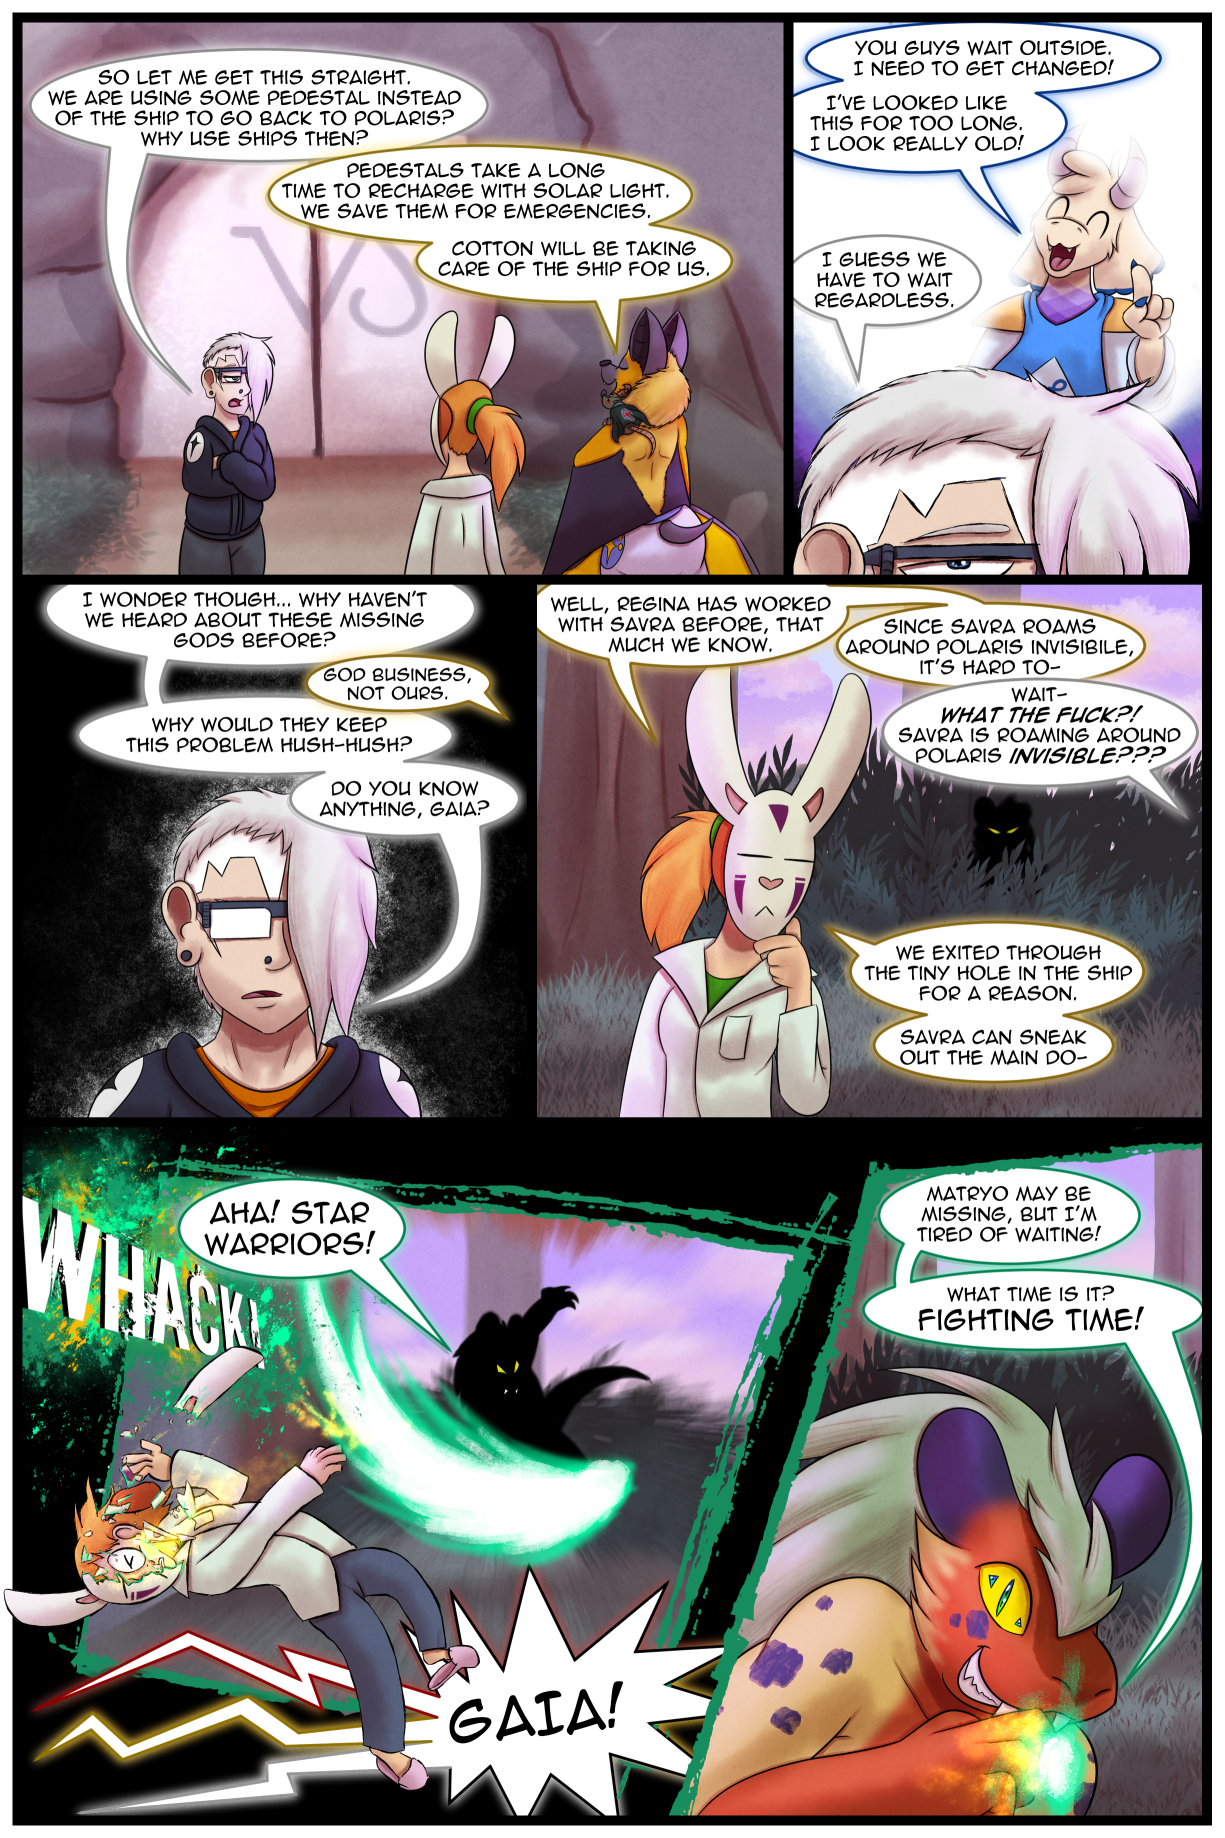 Ch6 Page 2 – Attacked